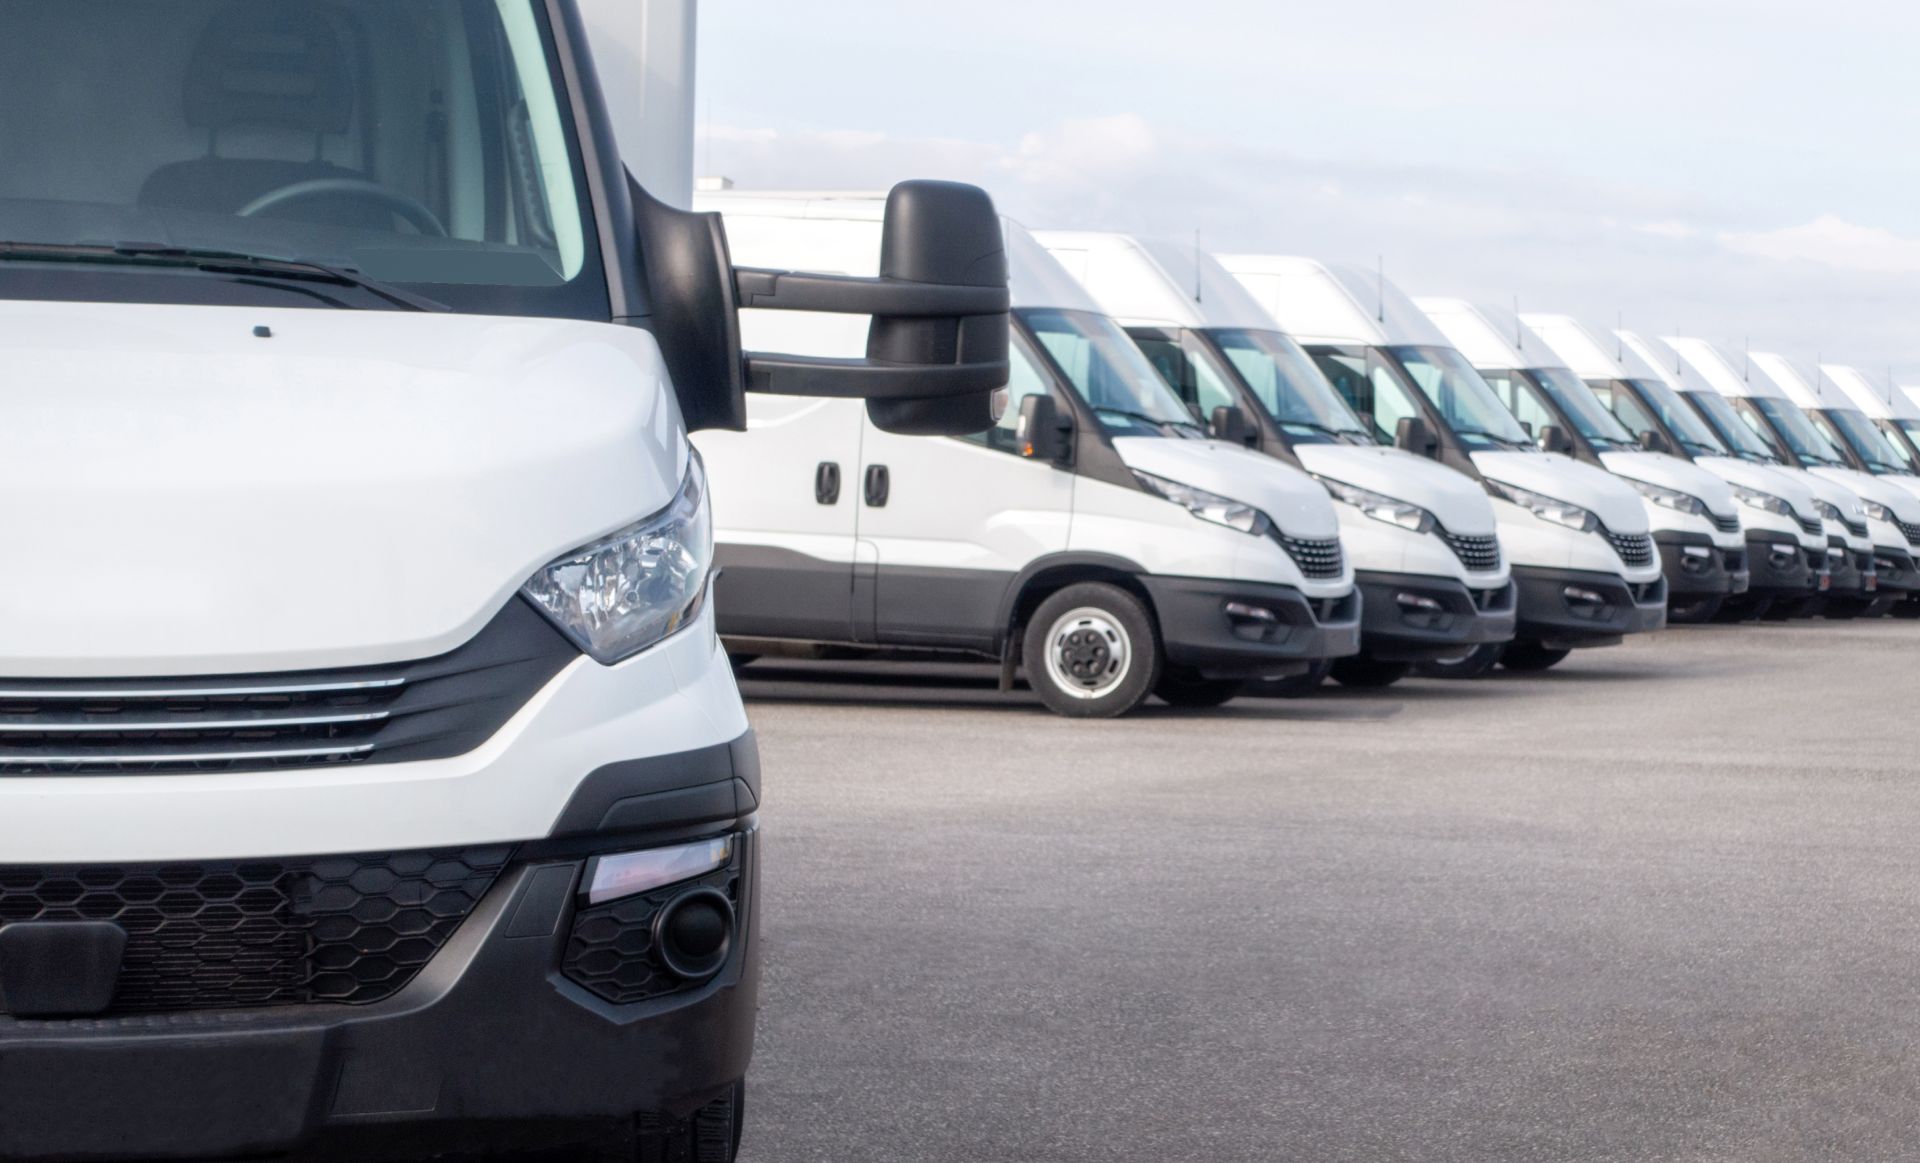 What Makes Successful Vehicle Fleet Management?